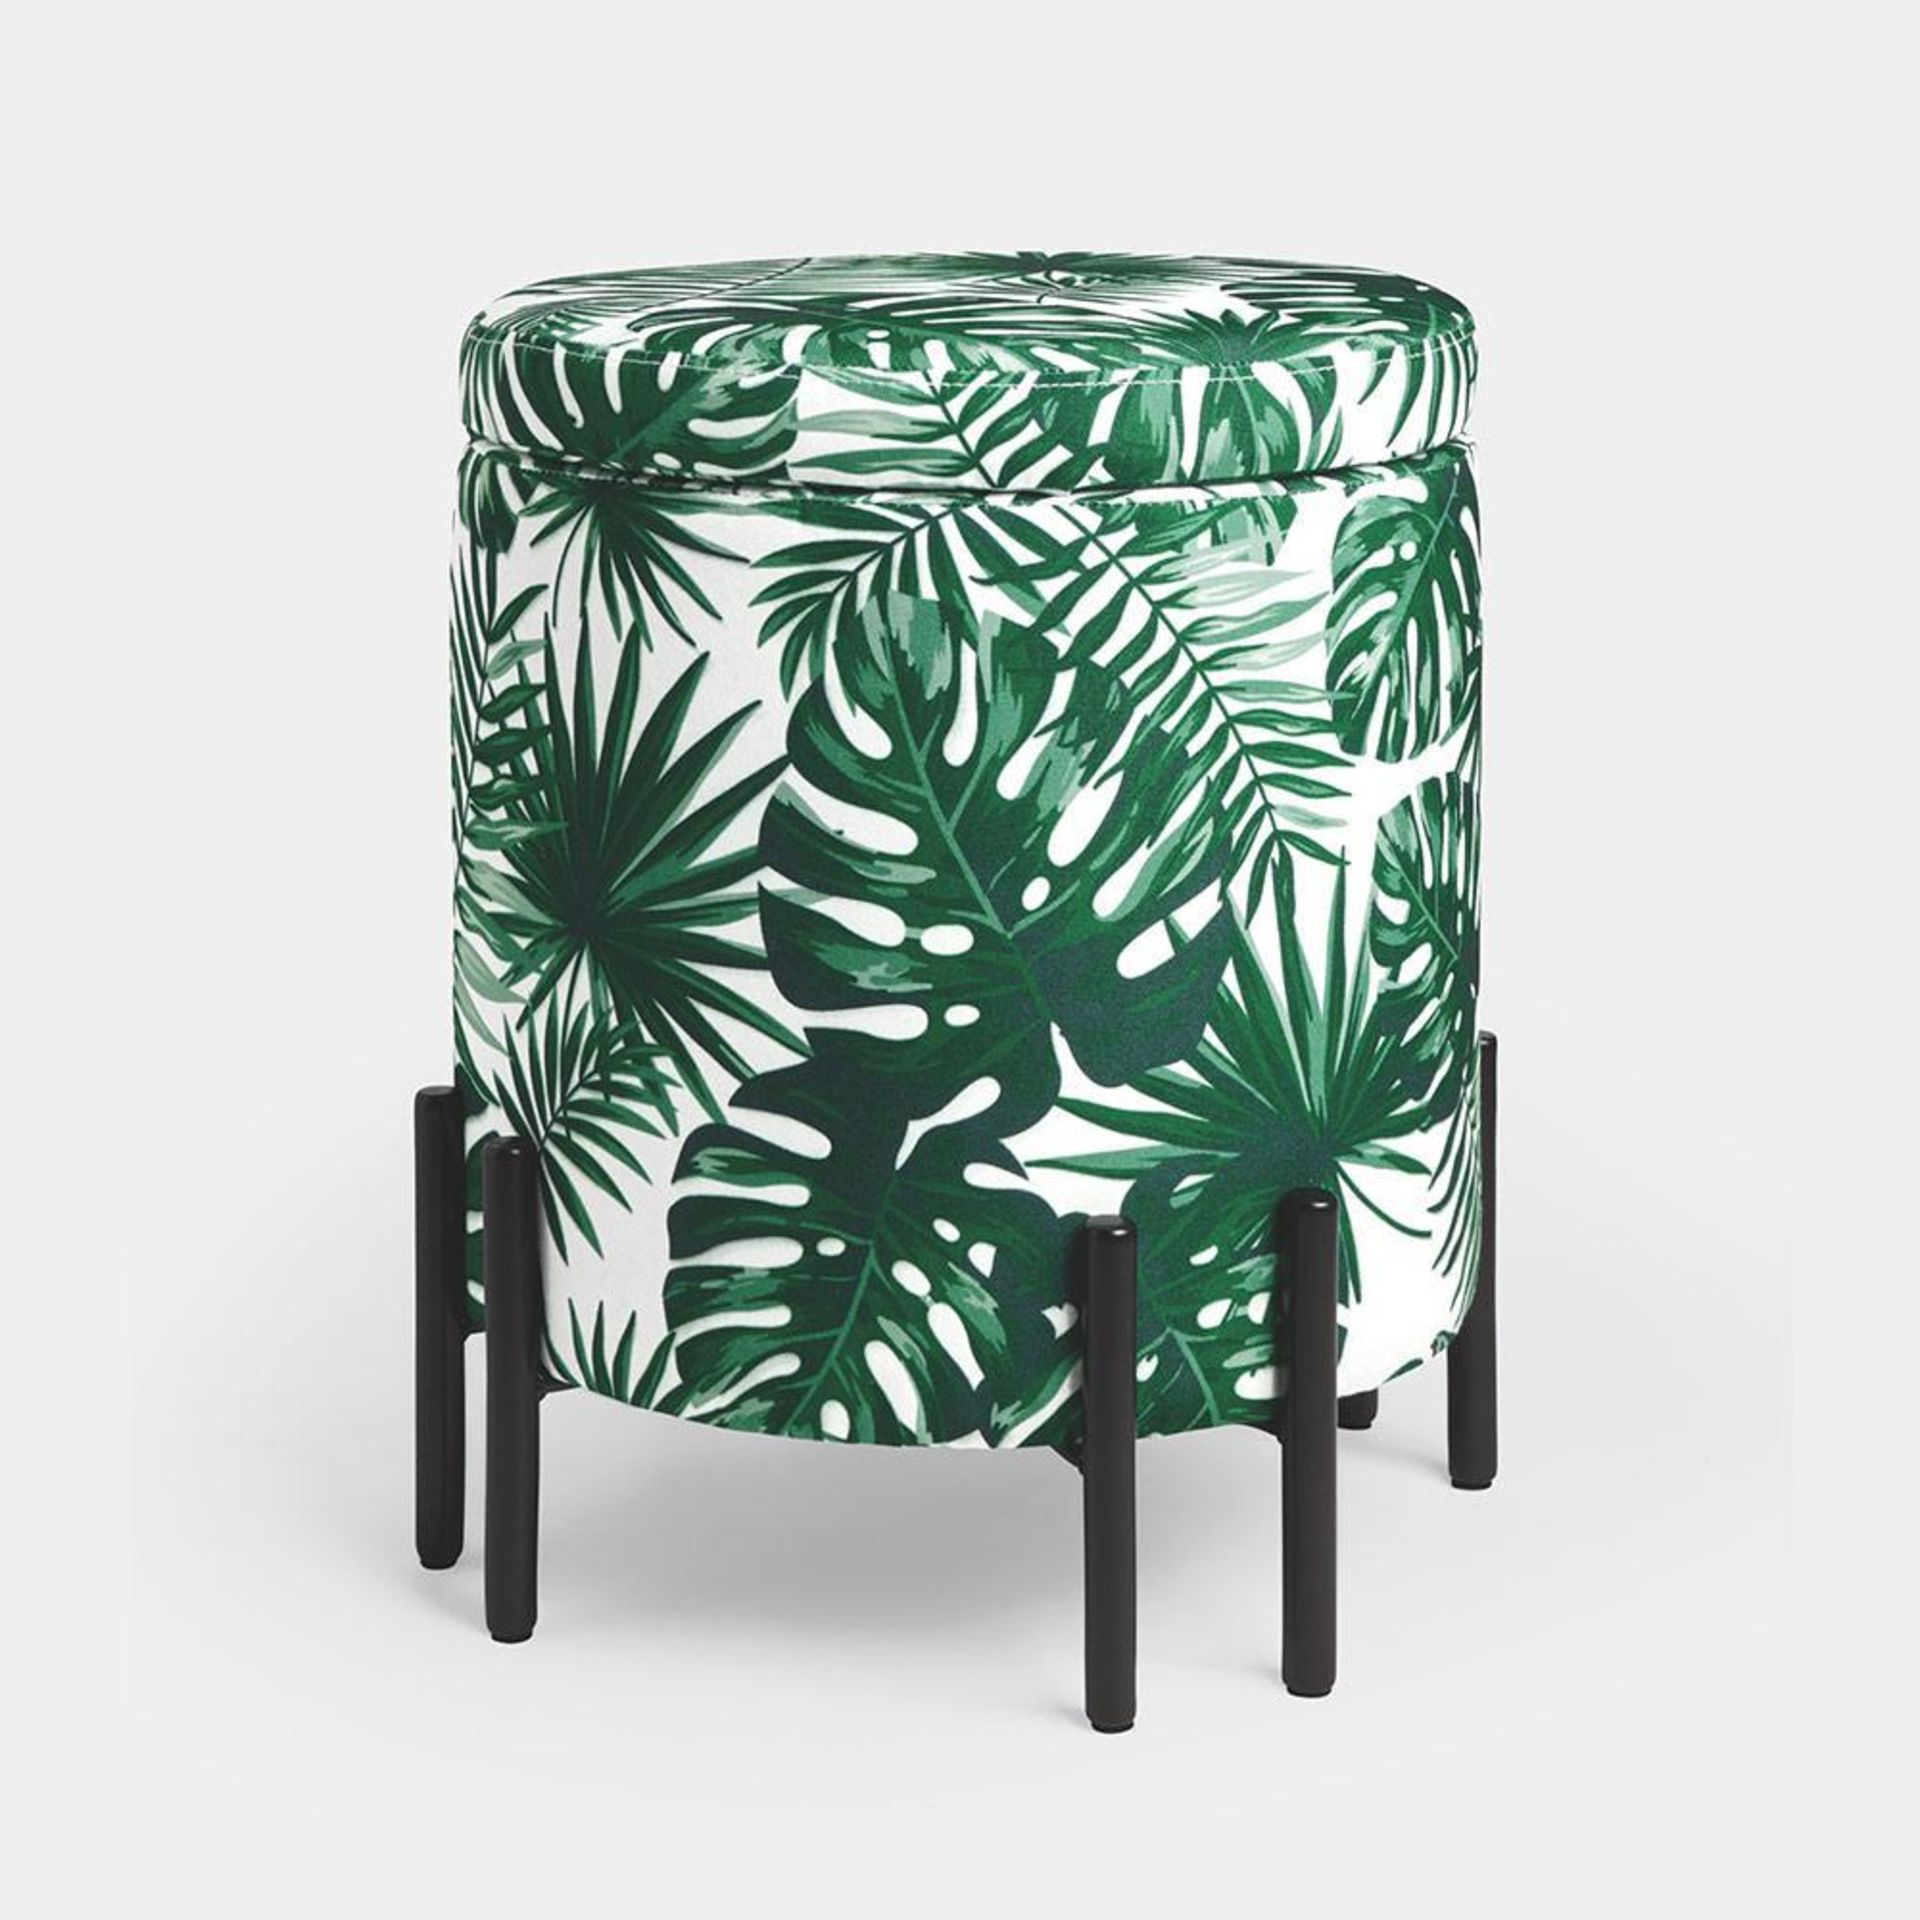 Tropical Storage Stool Tropical Storage StoolIt looks like a gorgeous stool, but lift the top and